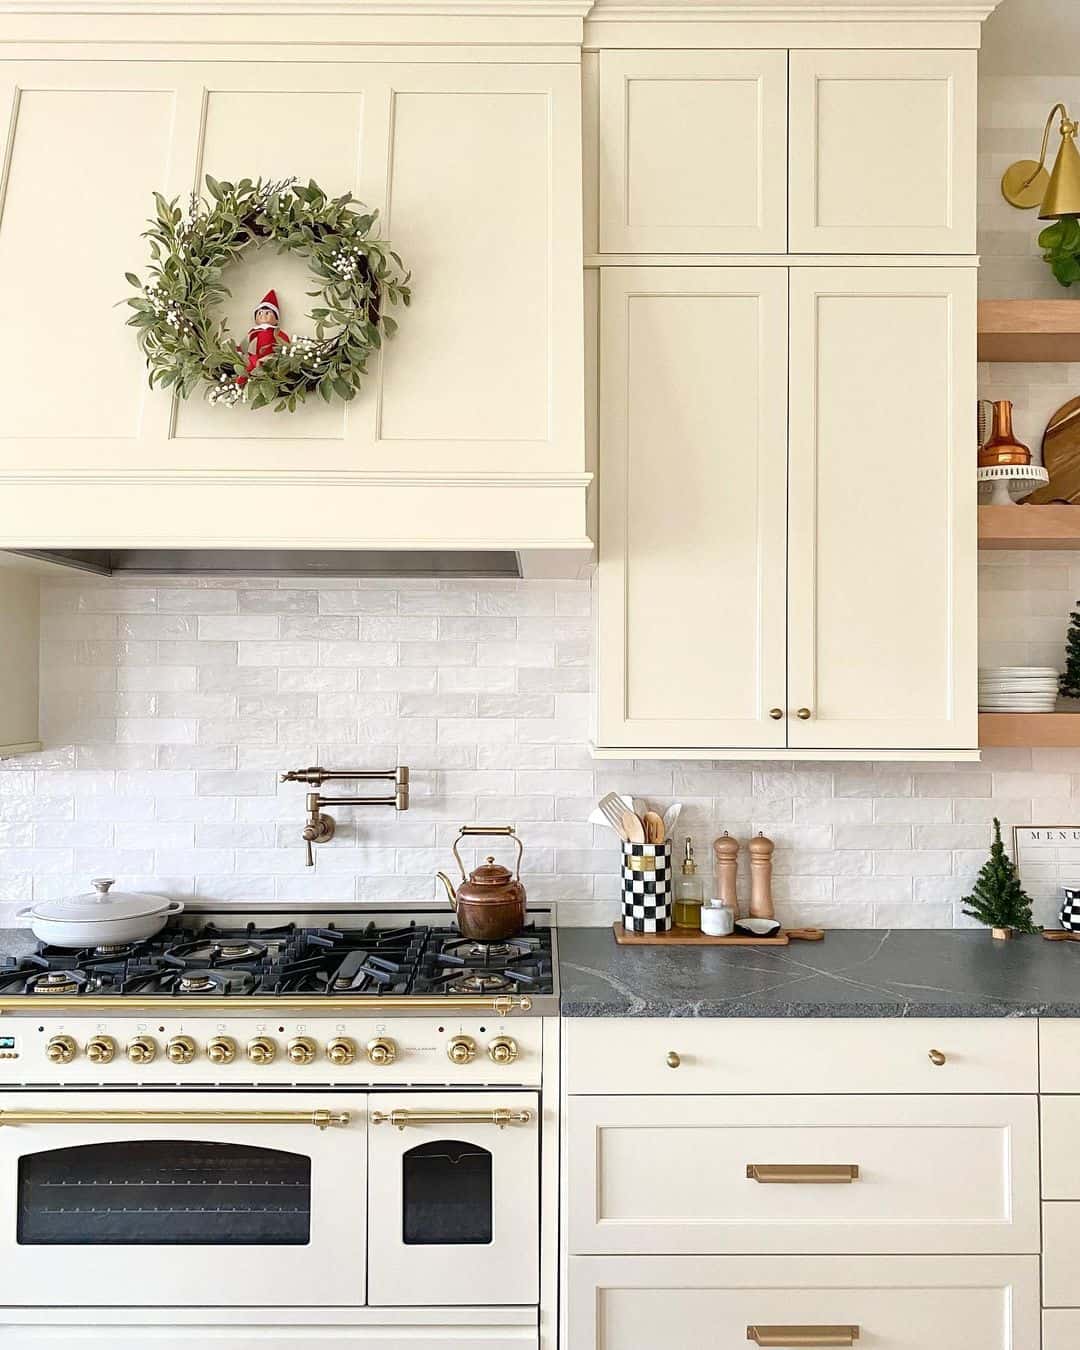 Enriched Cream-Colored Cabinets with Gold Hardware